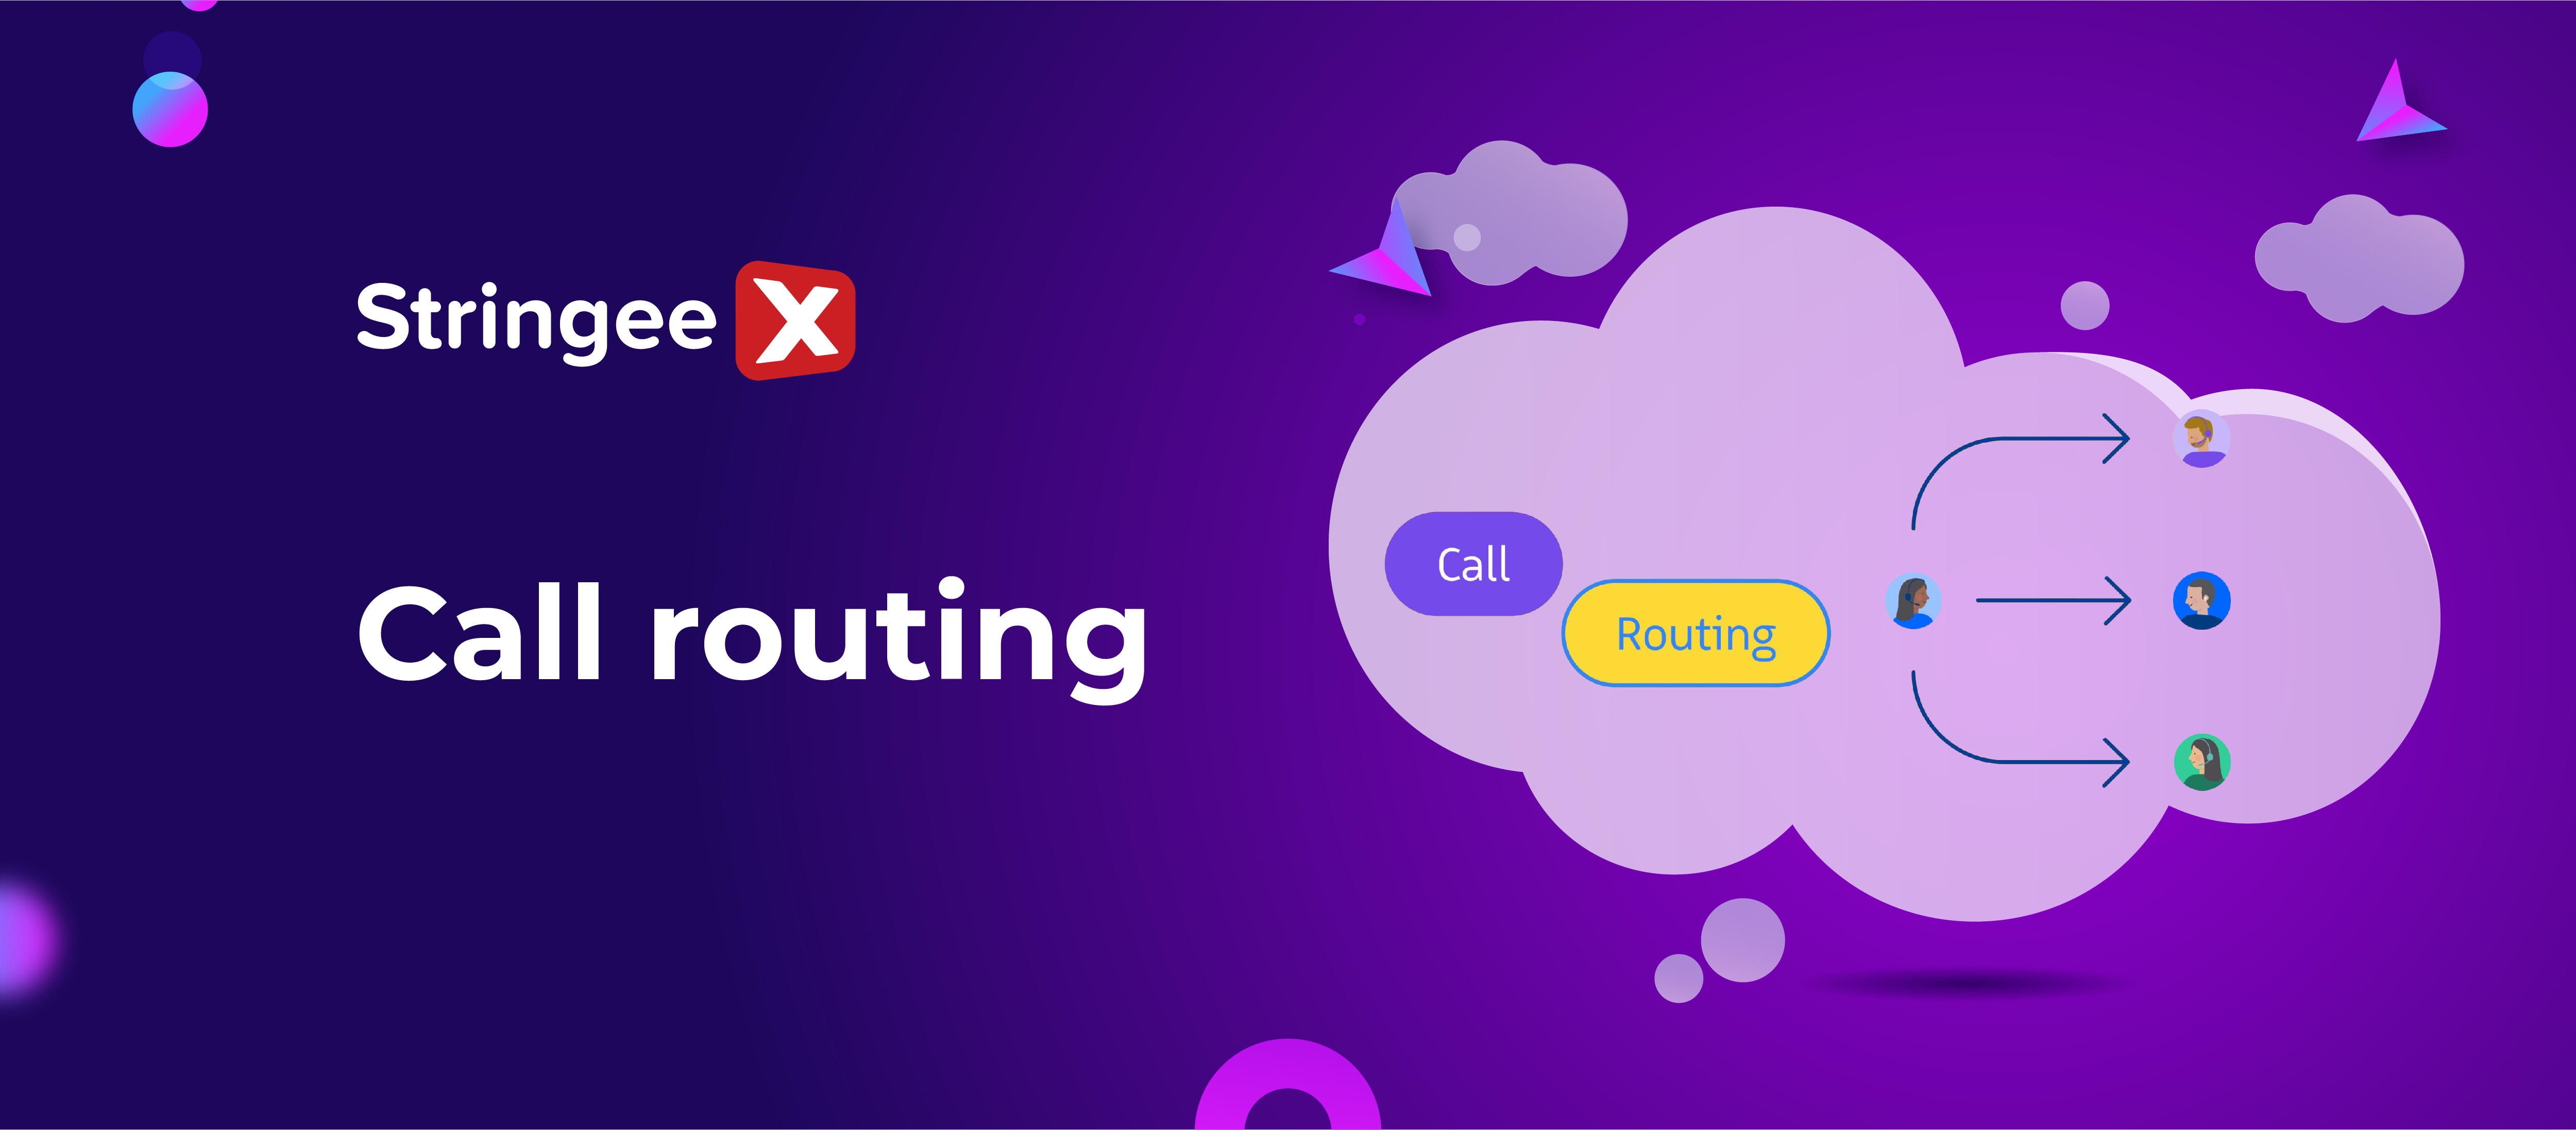 What Are The 8 Common Types Of Call Routing For Small Business?